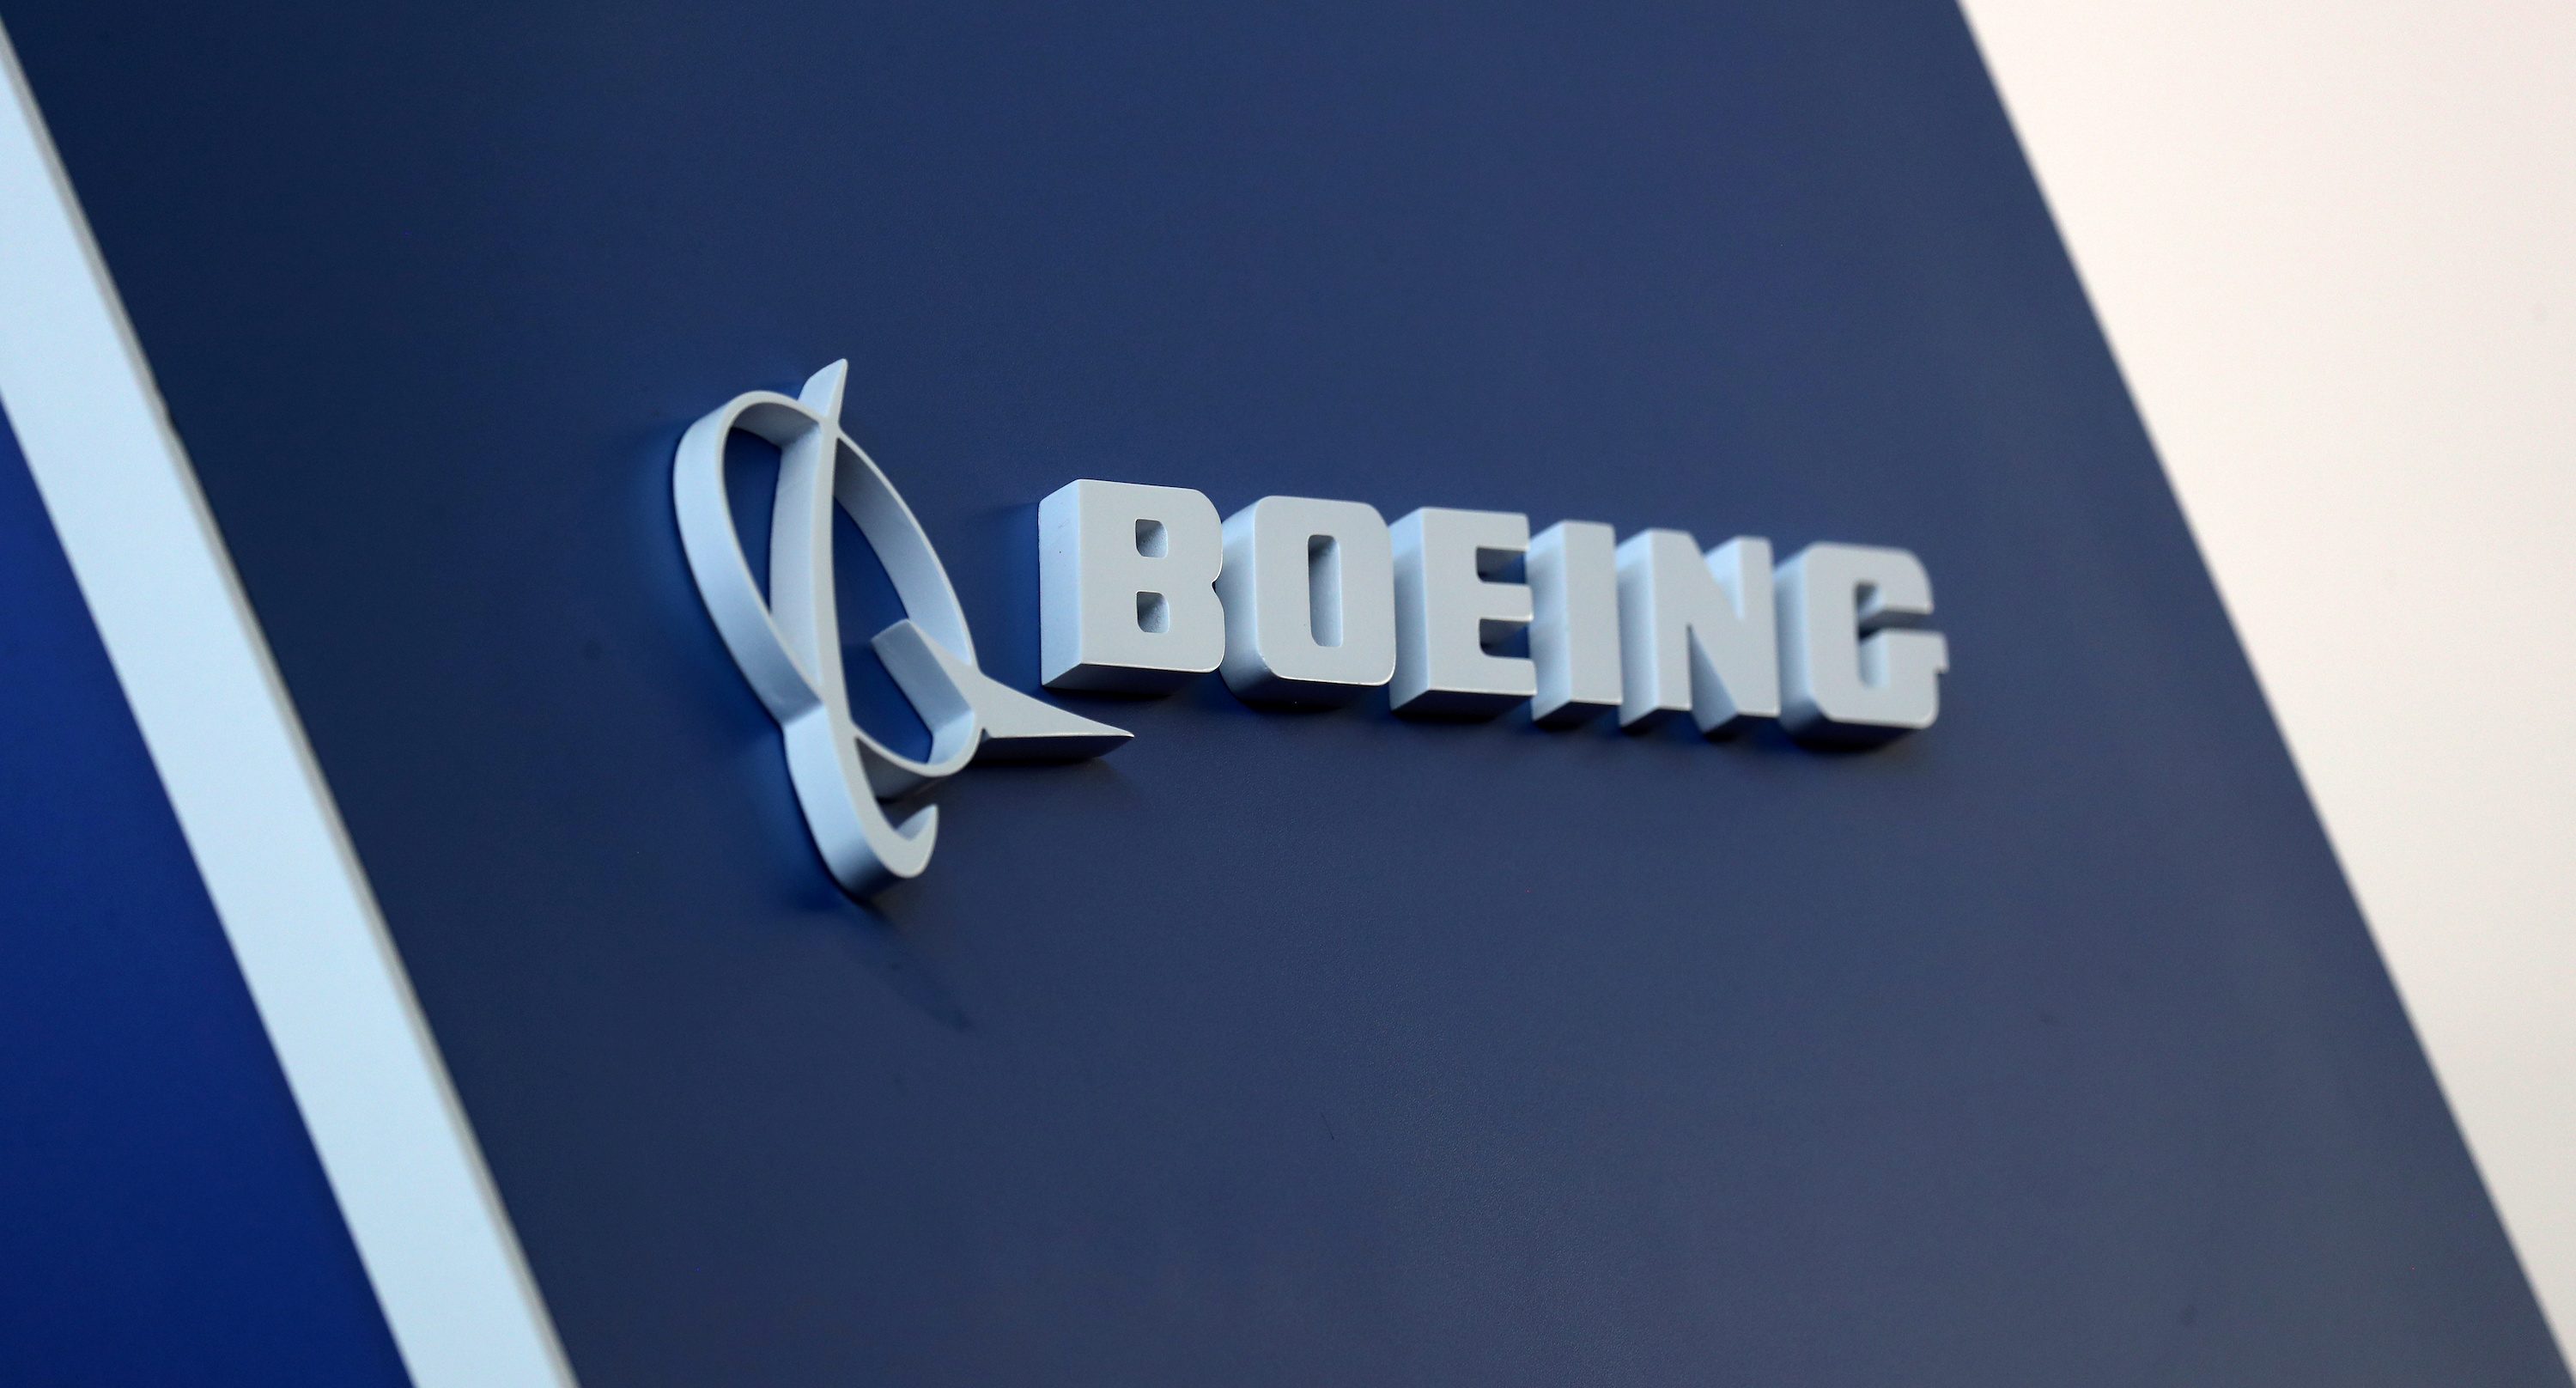 Boeing kicks off new year with 26 jet deliveries, 4 orders